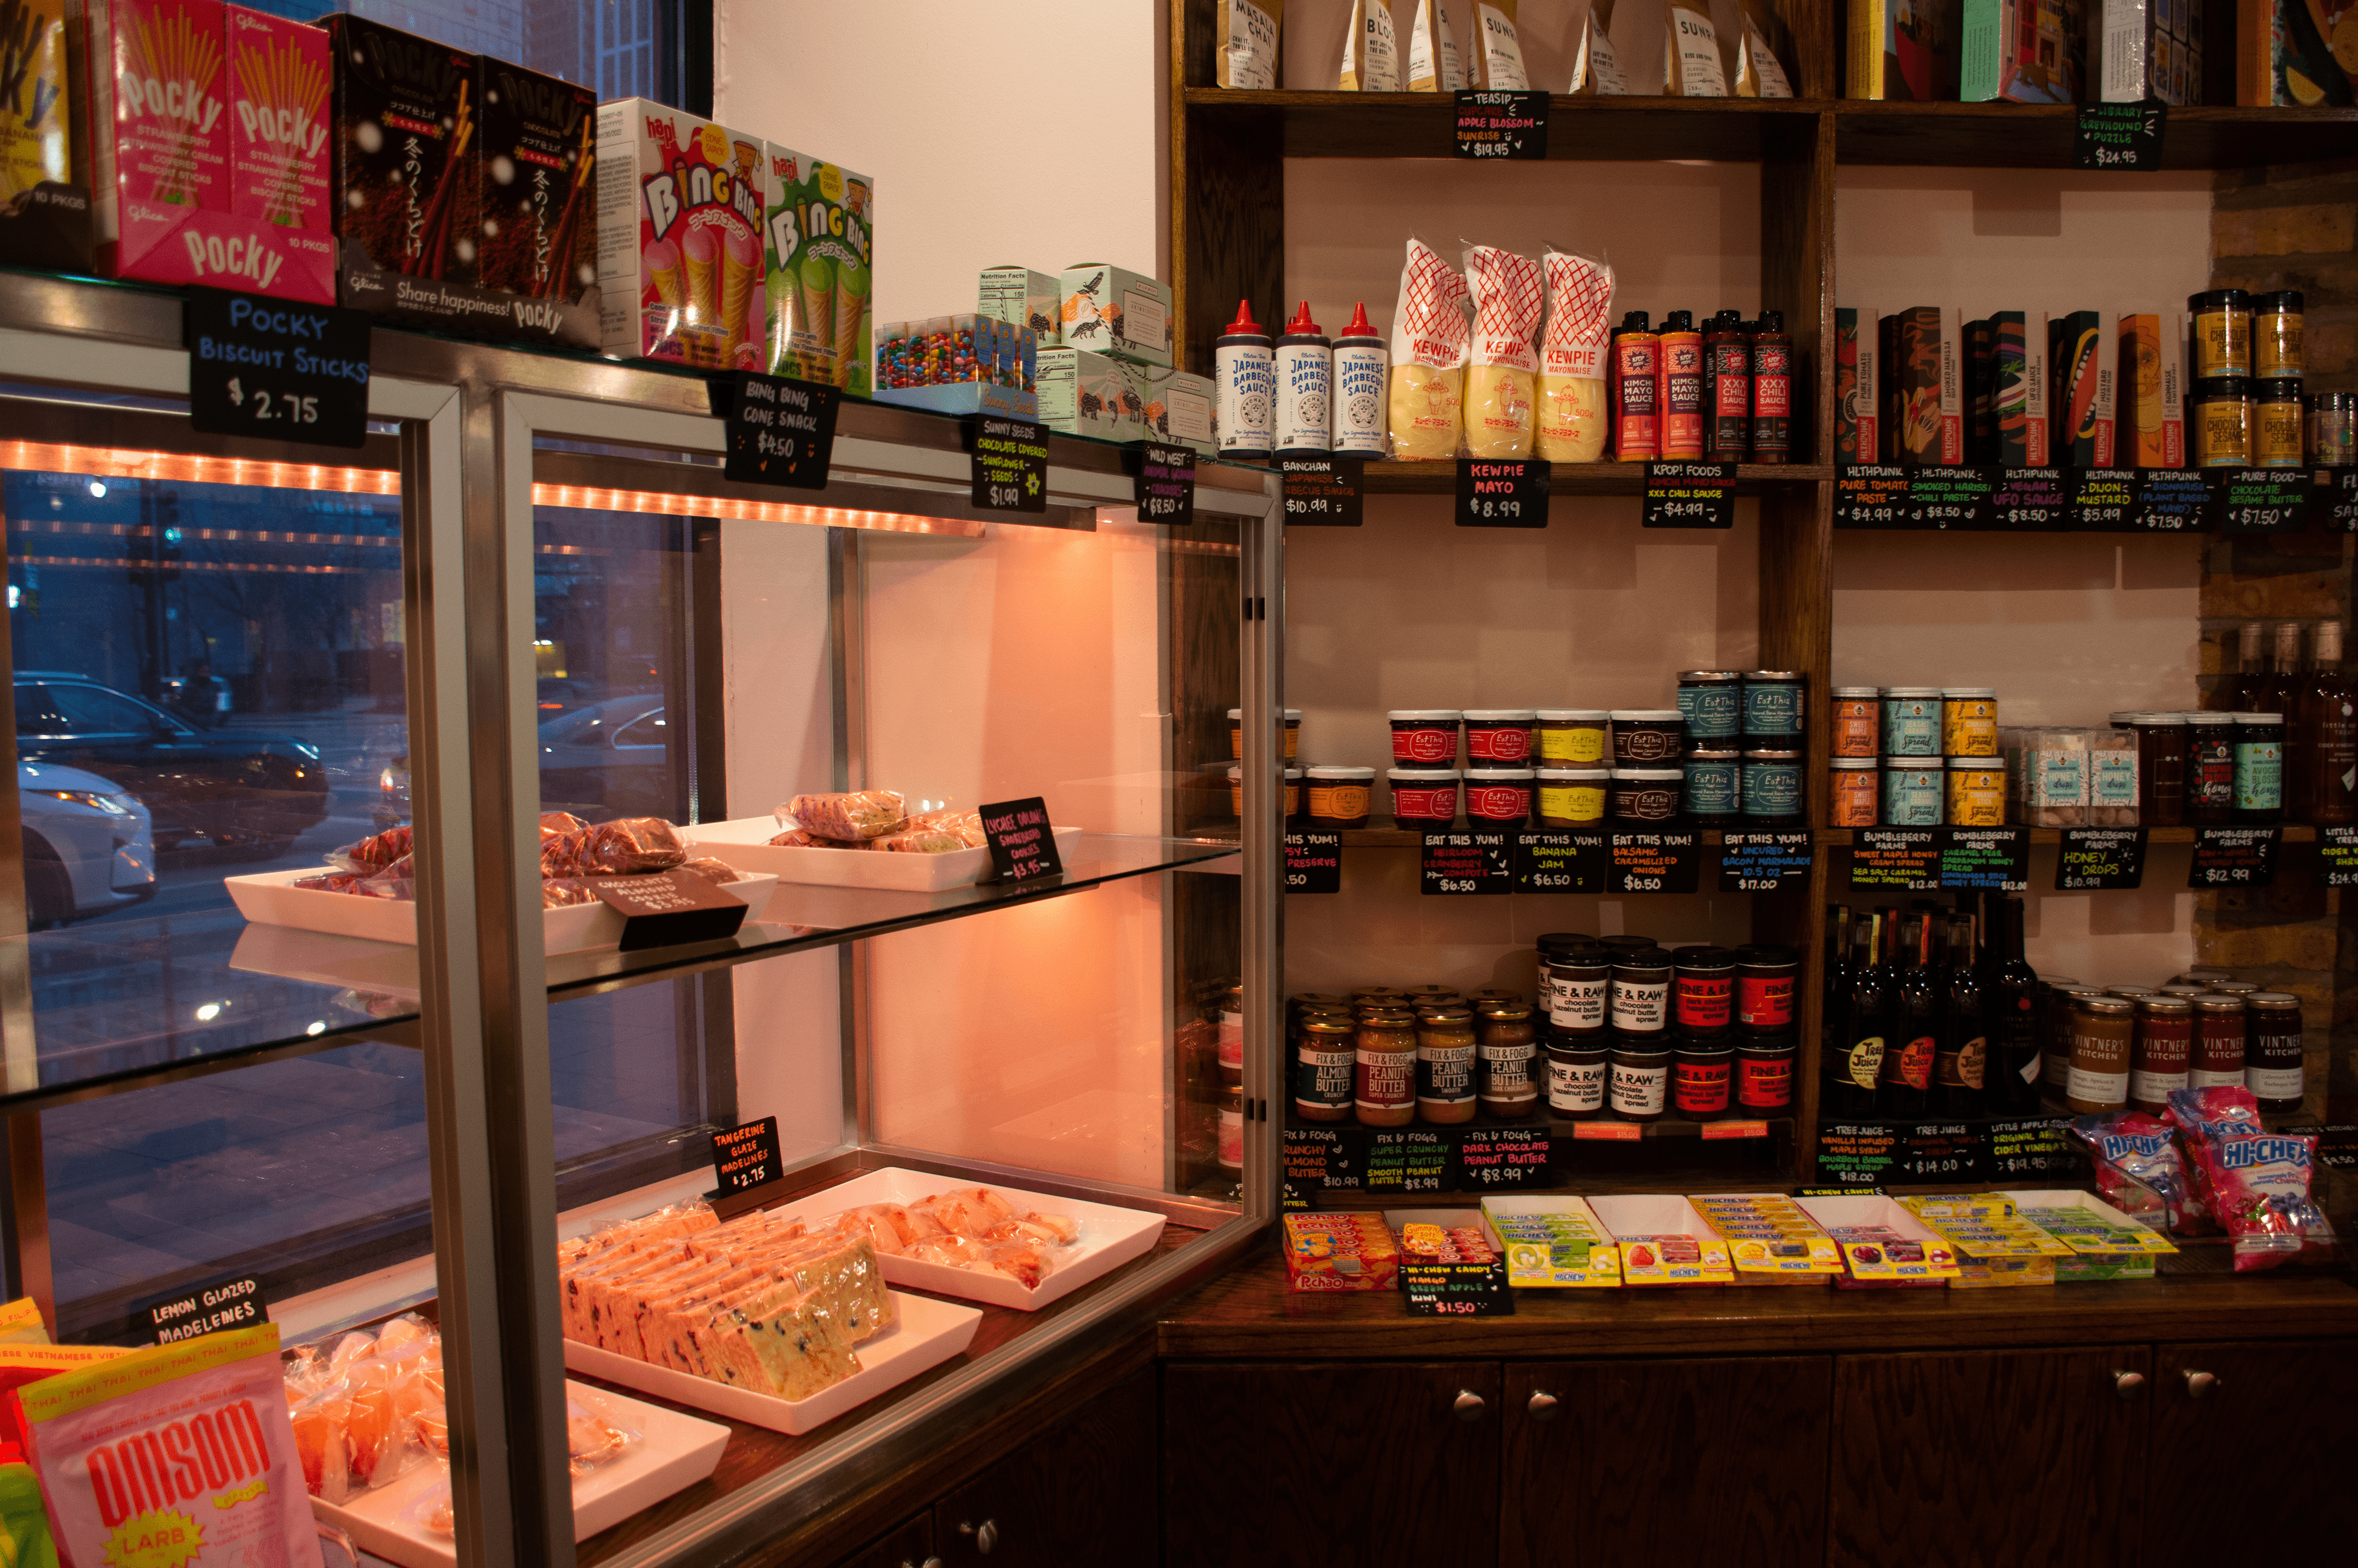 Pastries behind glass and a shelf filled with different snacks and other treats.